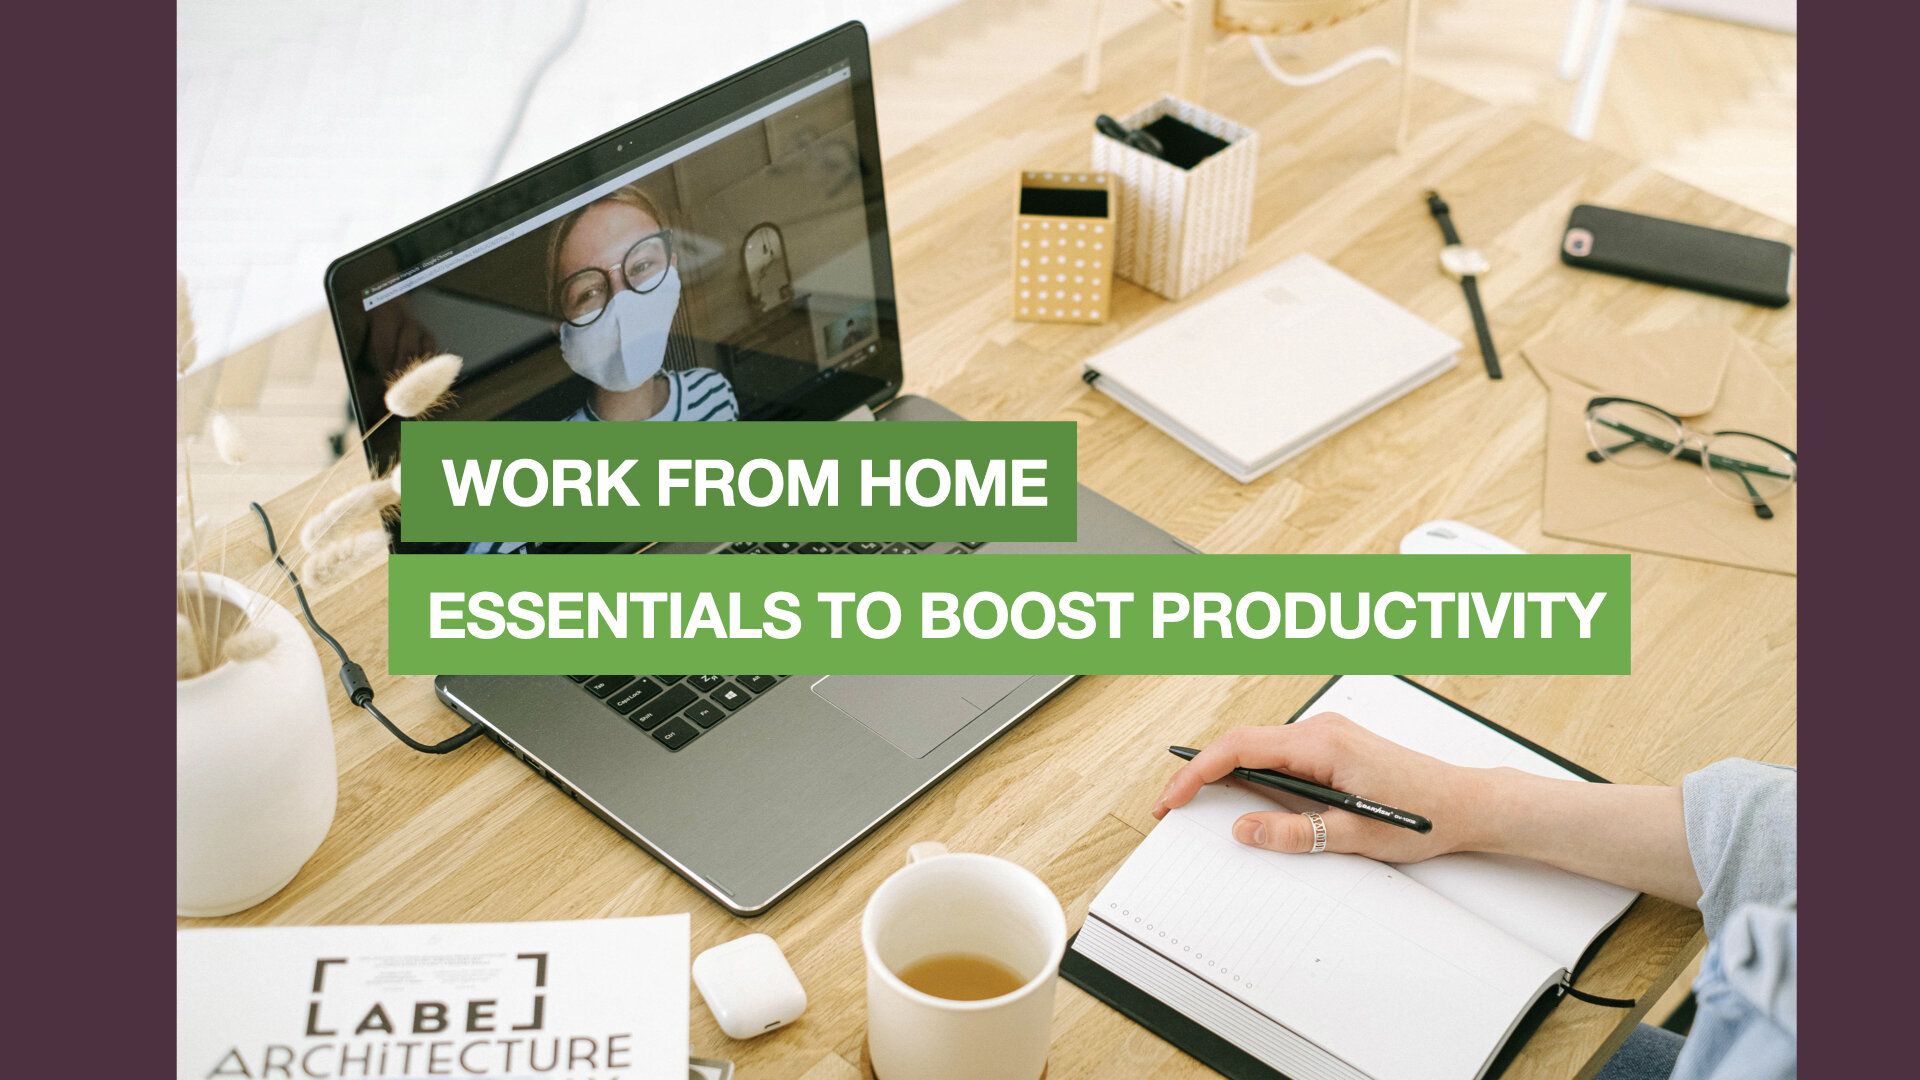 Work from home essentials